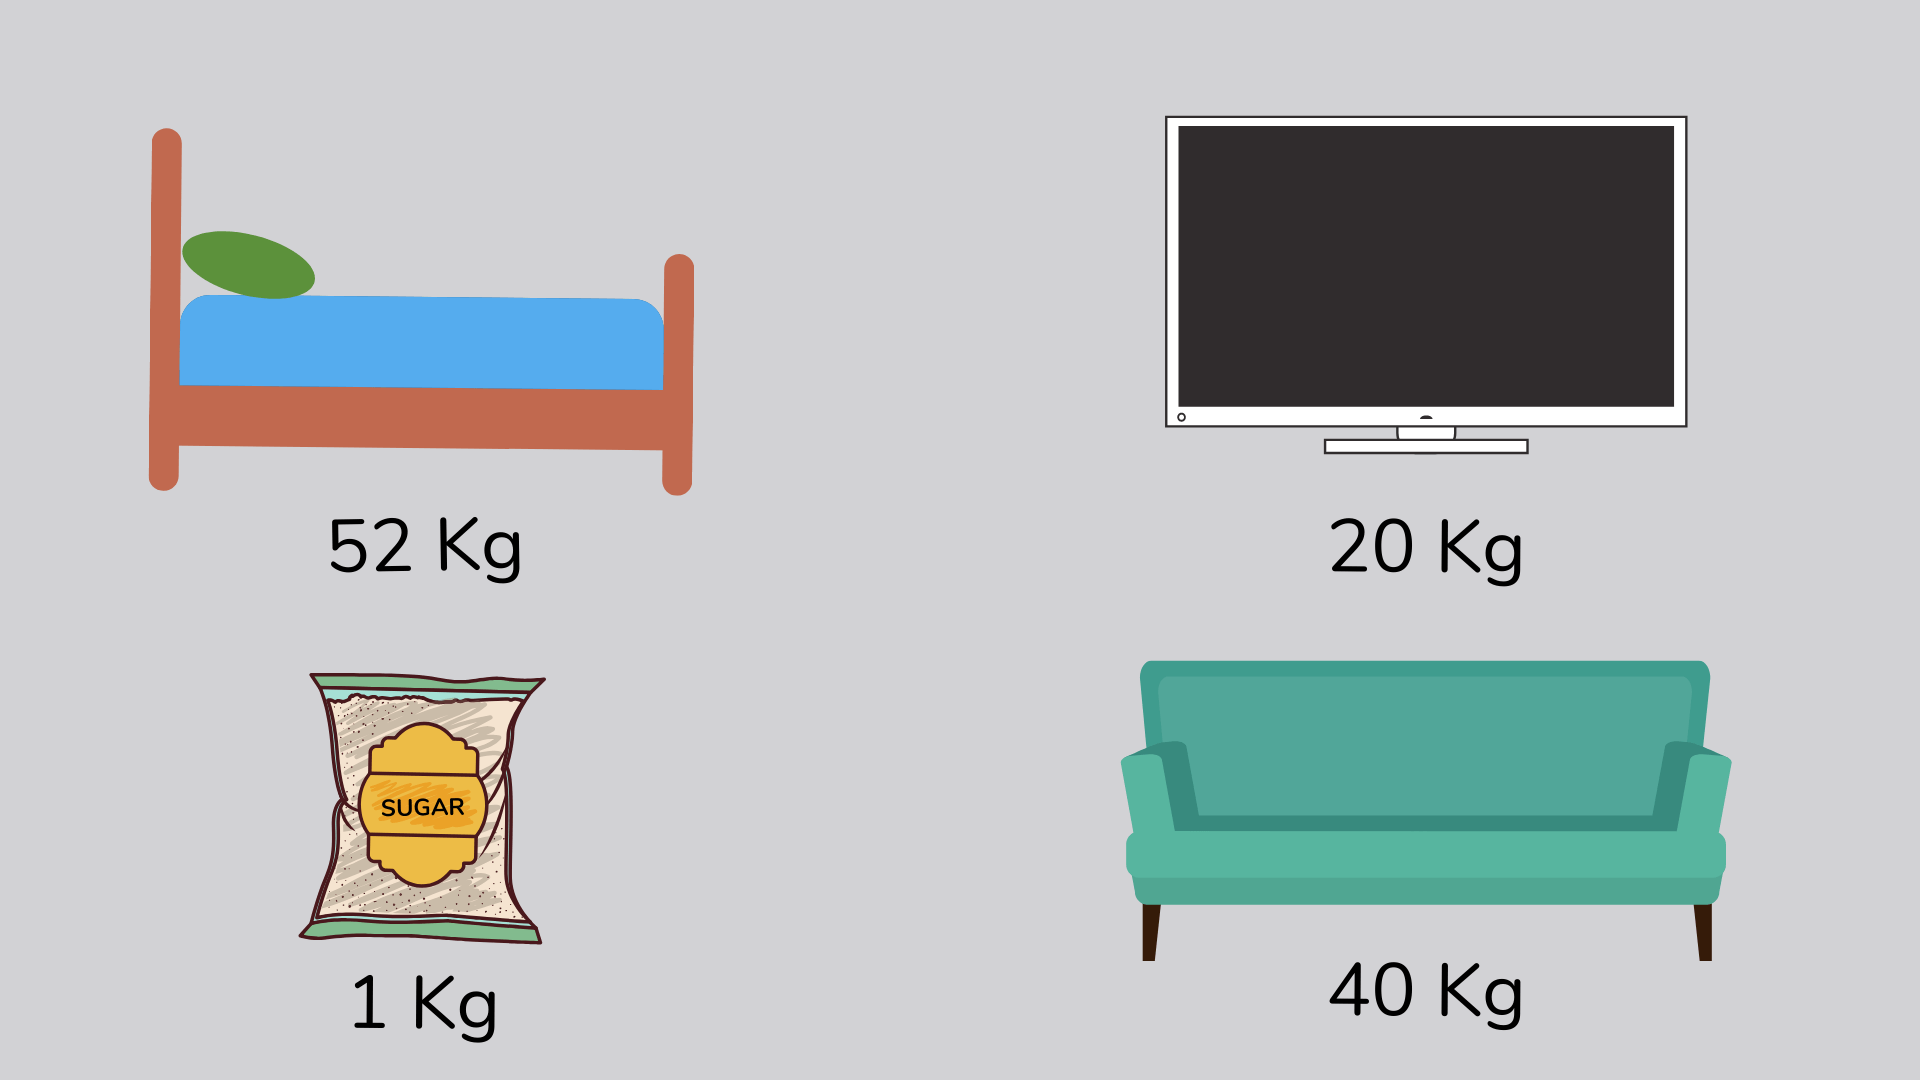 mass of different household objects including a bag of sugar, a bed, a sofa and a monitor